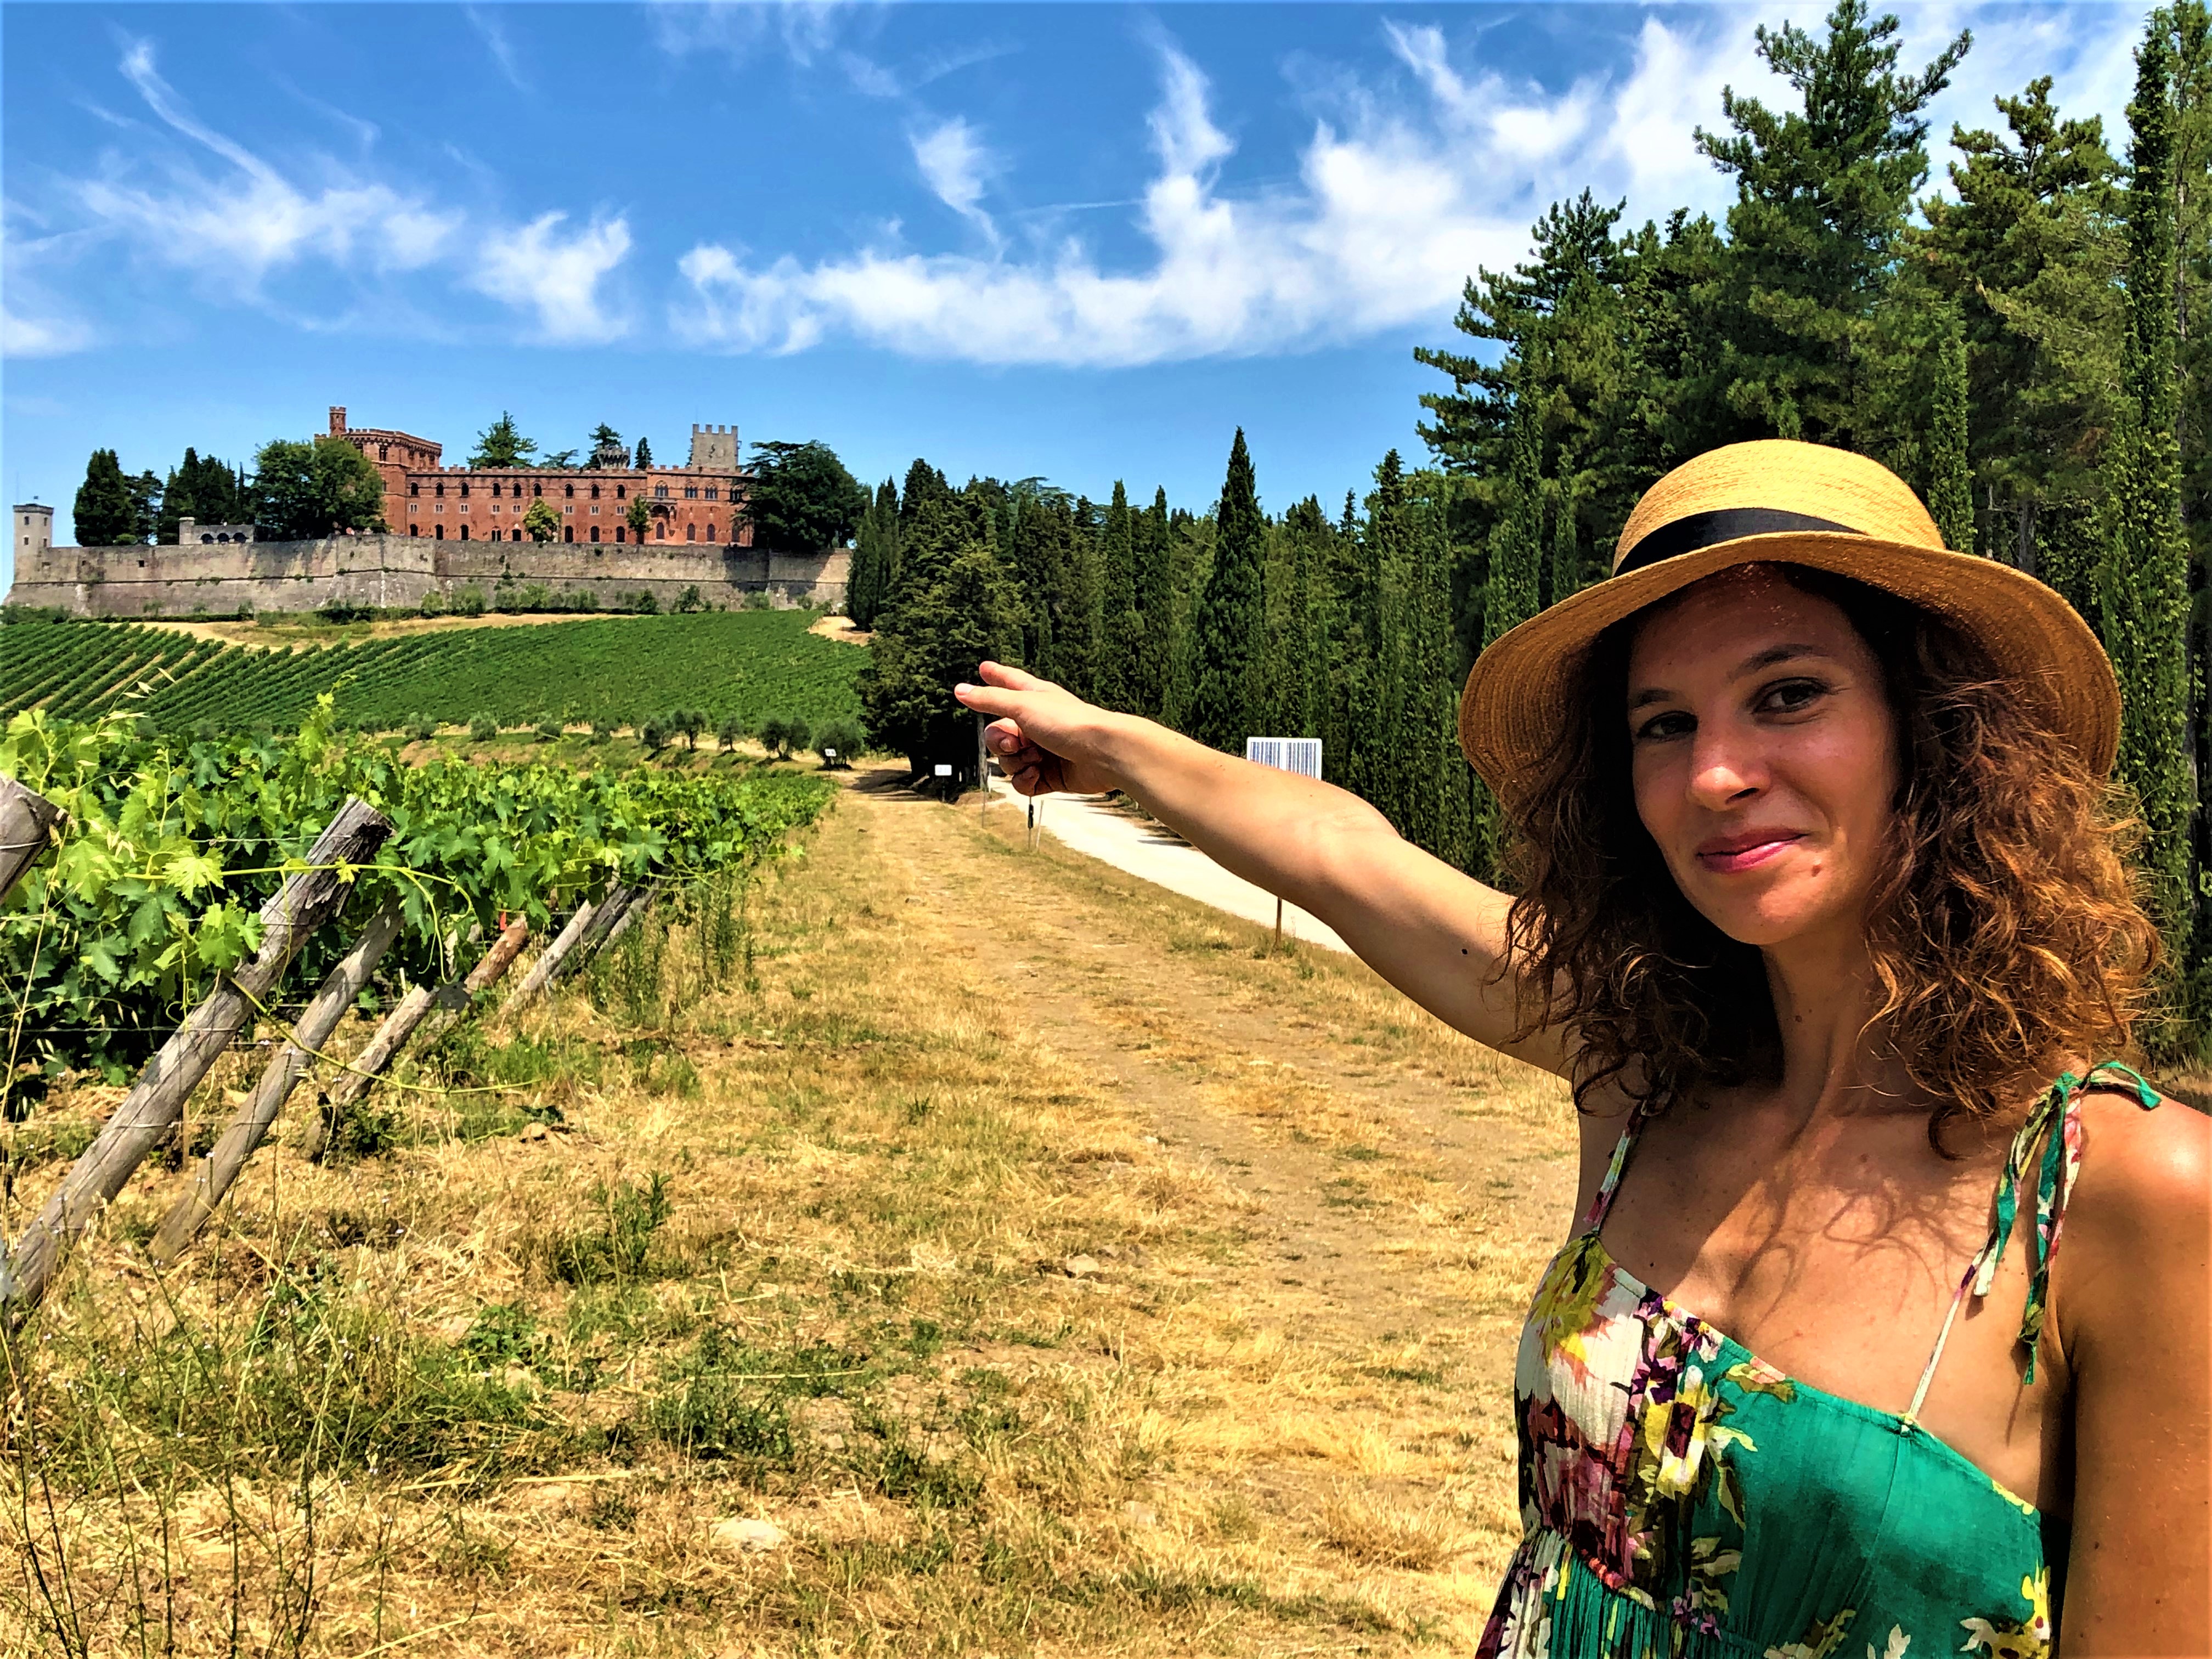 Go with Flo tour guide & leader for traveling Tuscany with knowledge & passion